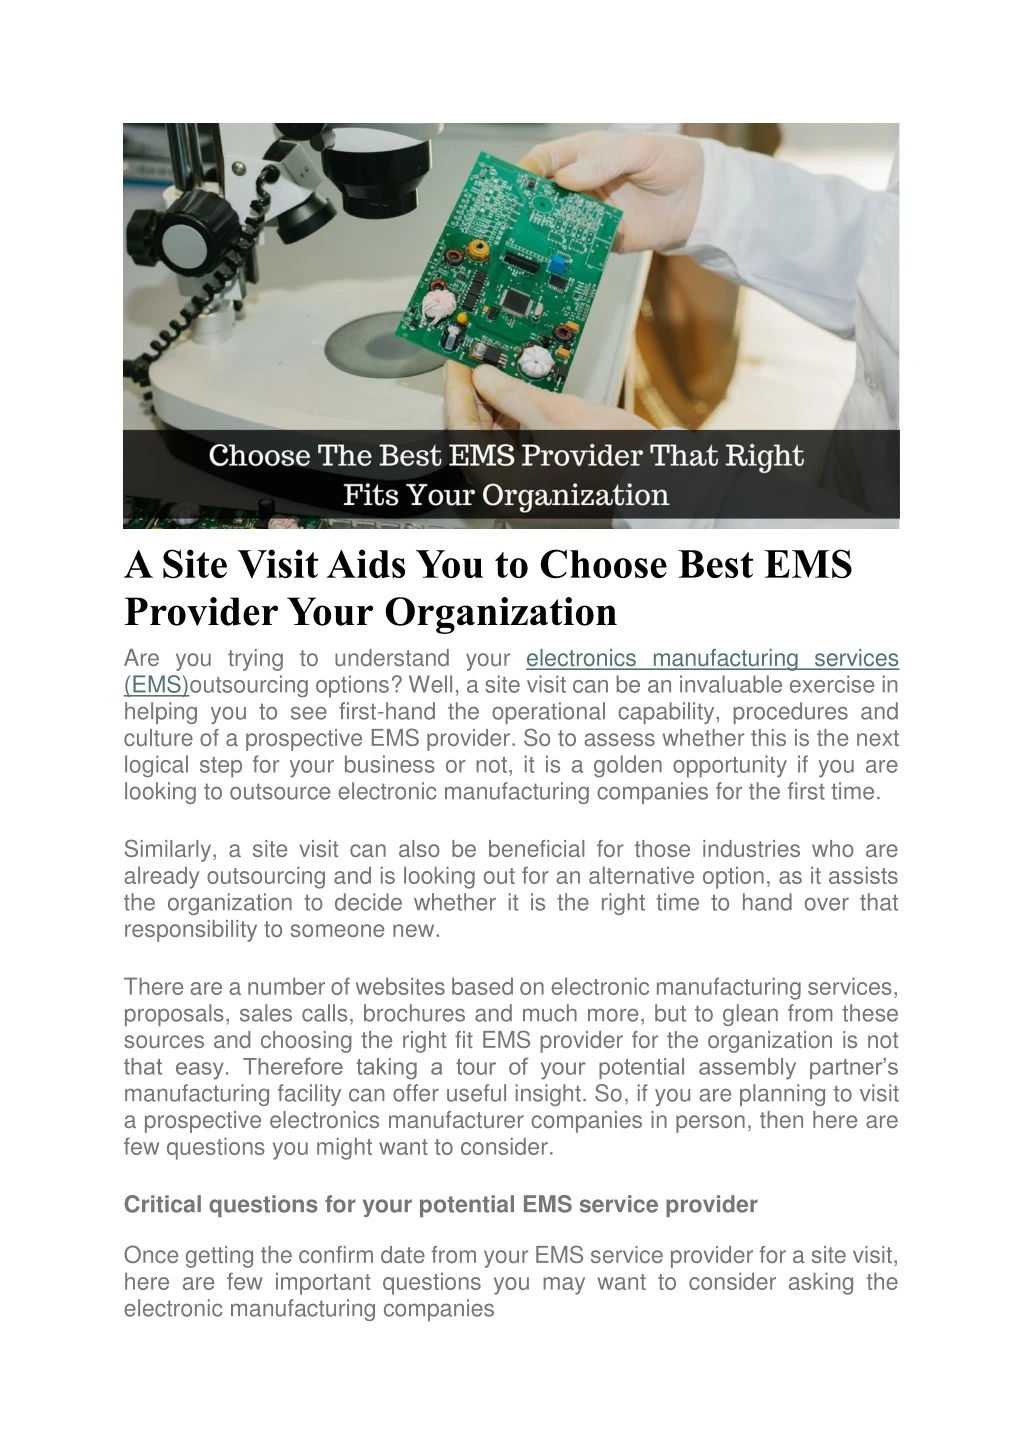 a site visit aids you to choose best ems provider